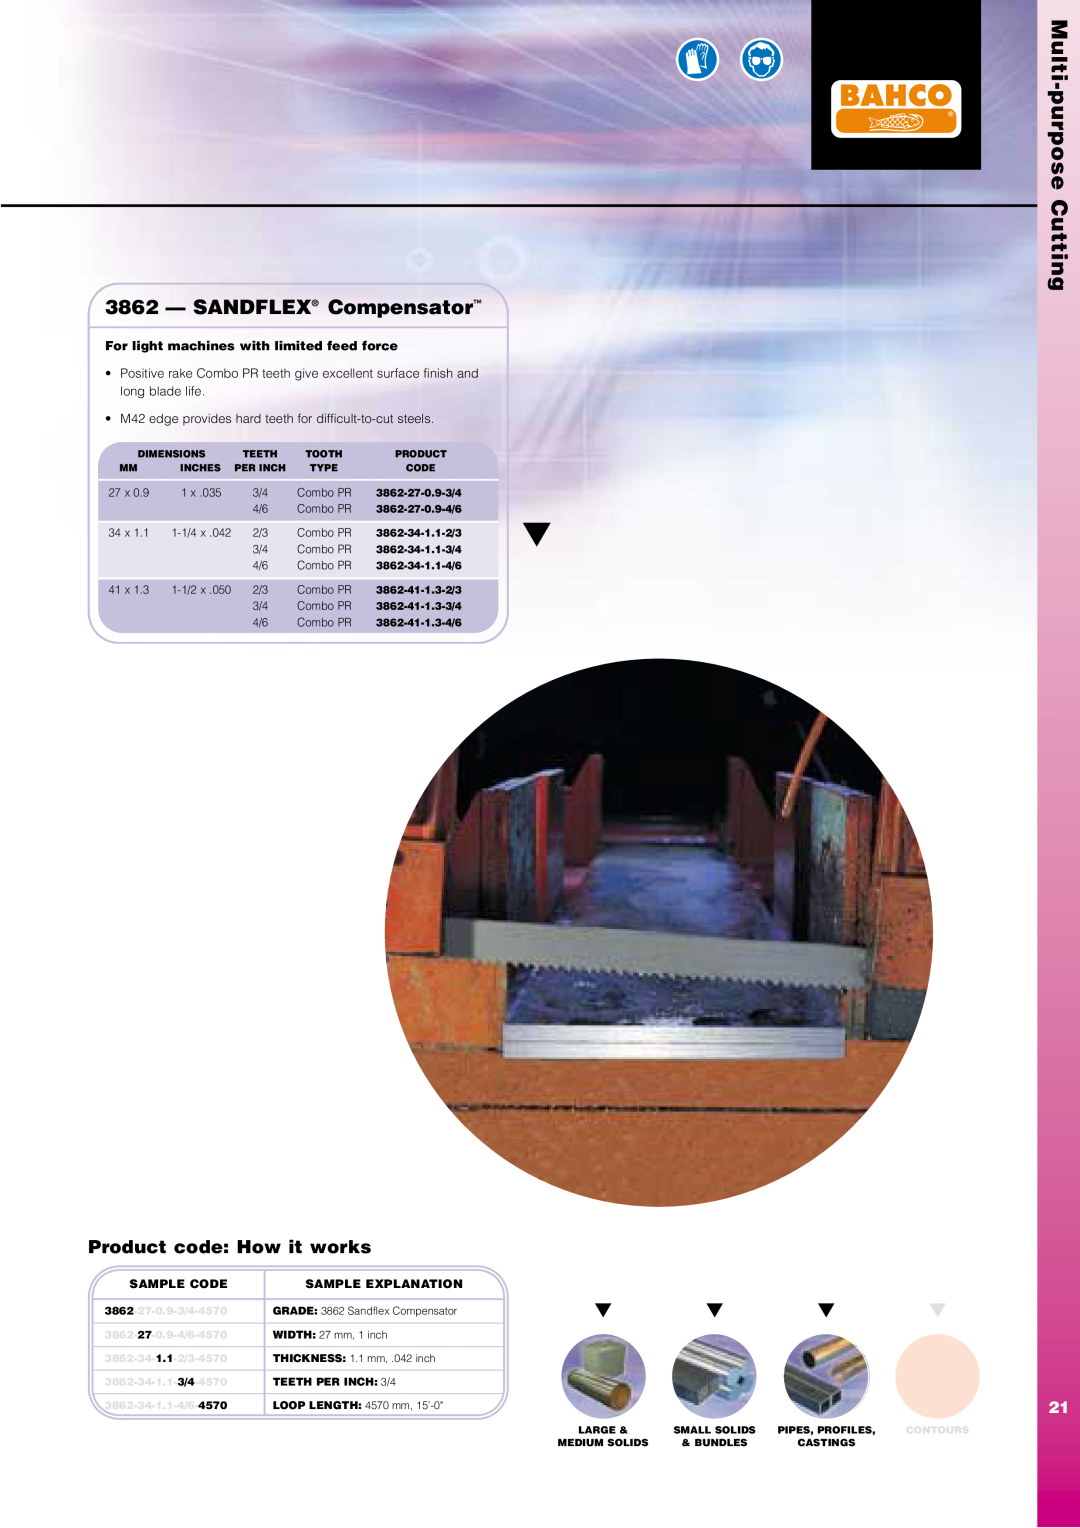 Bahco Saw manual SANDFLEX Compensator, Multi-purpose Cutting, For light machines with limited feed force, Sample Code 